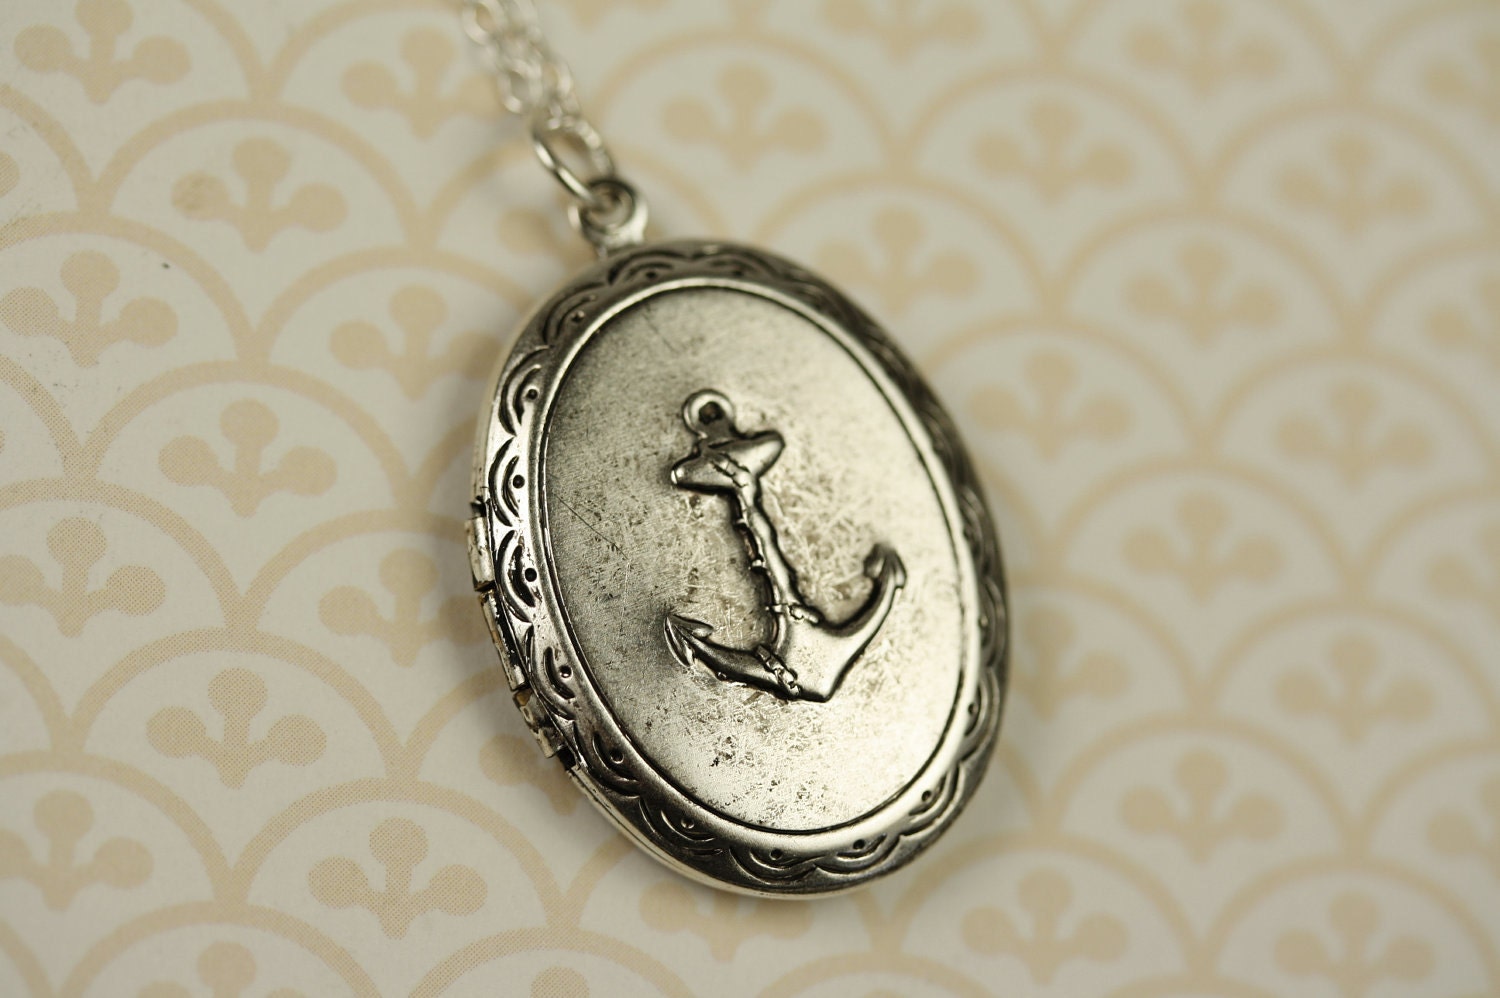 Silver Plated Sailor Locket, Vintage Nautical Photo Pendant, Simple Jewelry, Long Anchor Necklace, Oval Shape, Sterling Chain